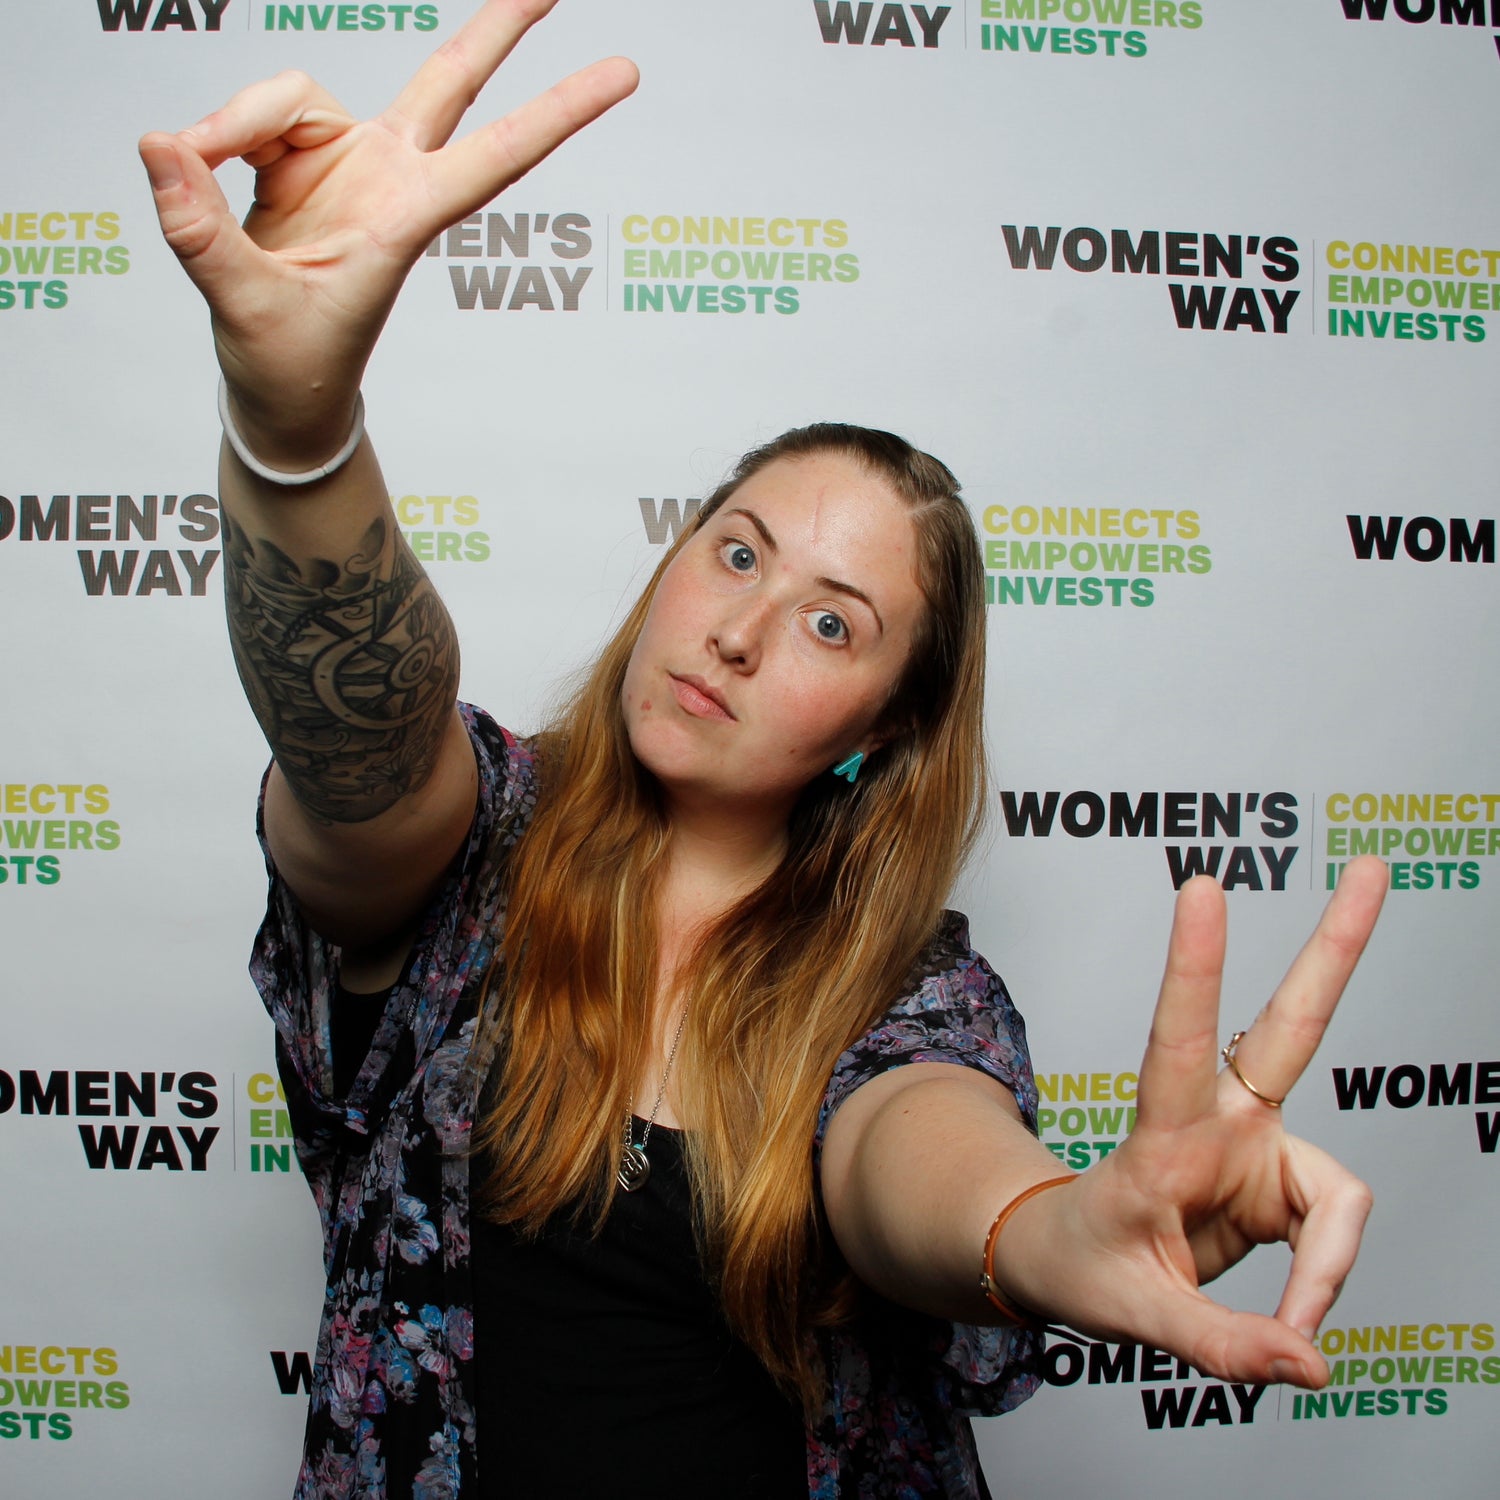 Woman giving peace signs in the Women's Way Philadelphia Event Photo Booth